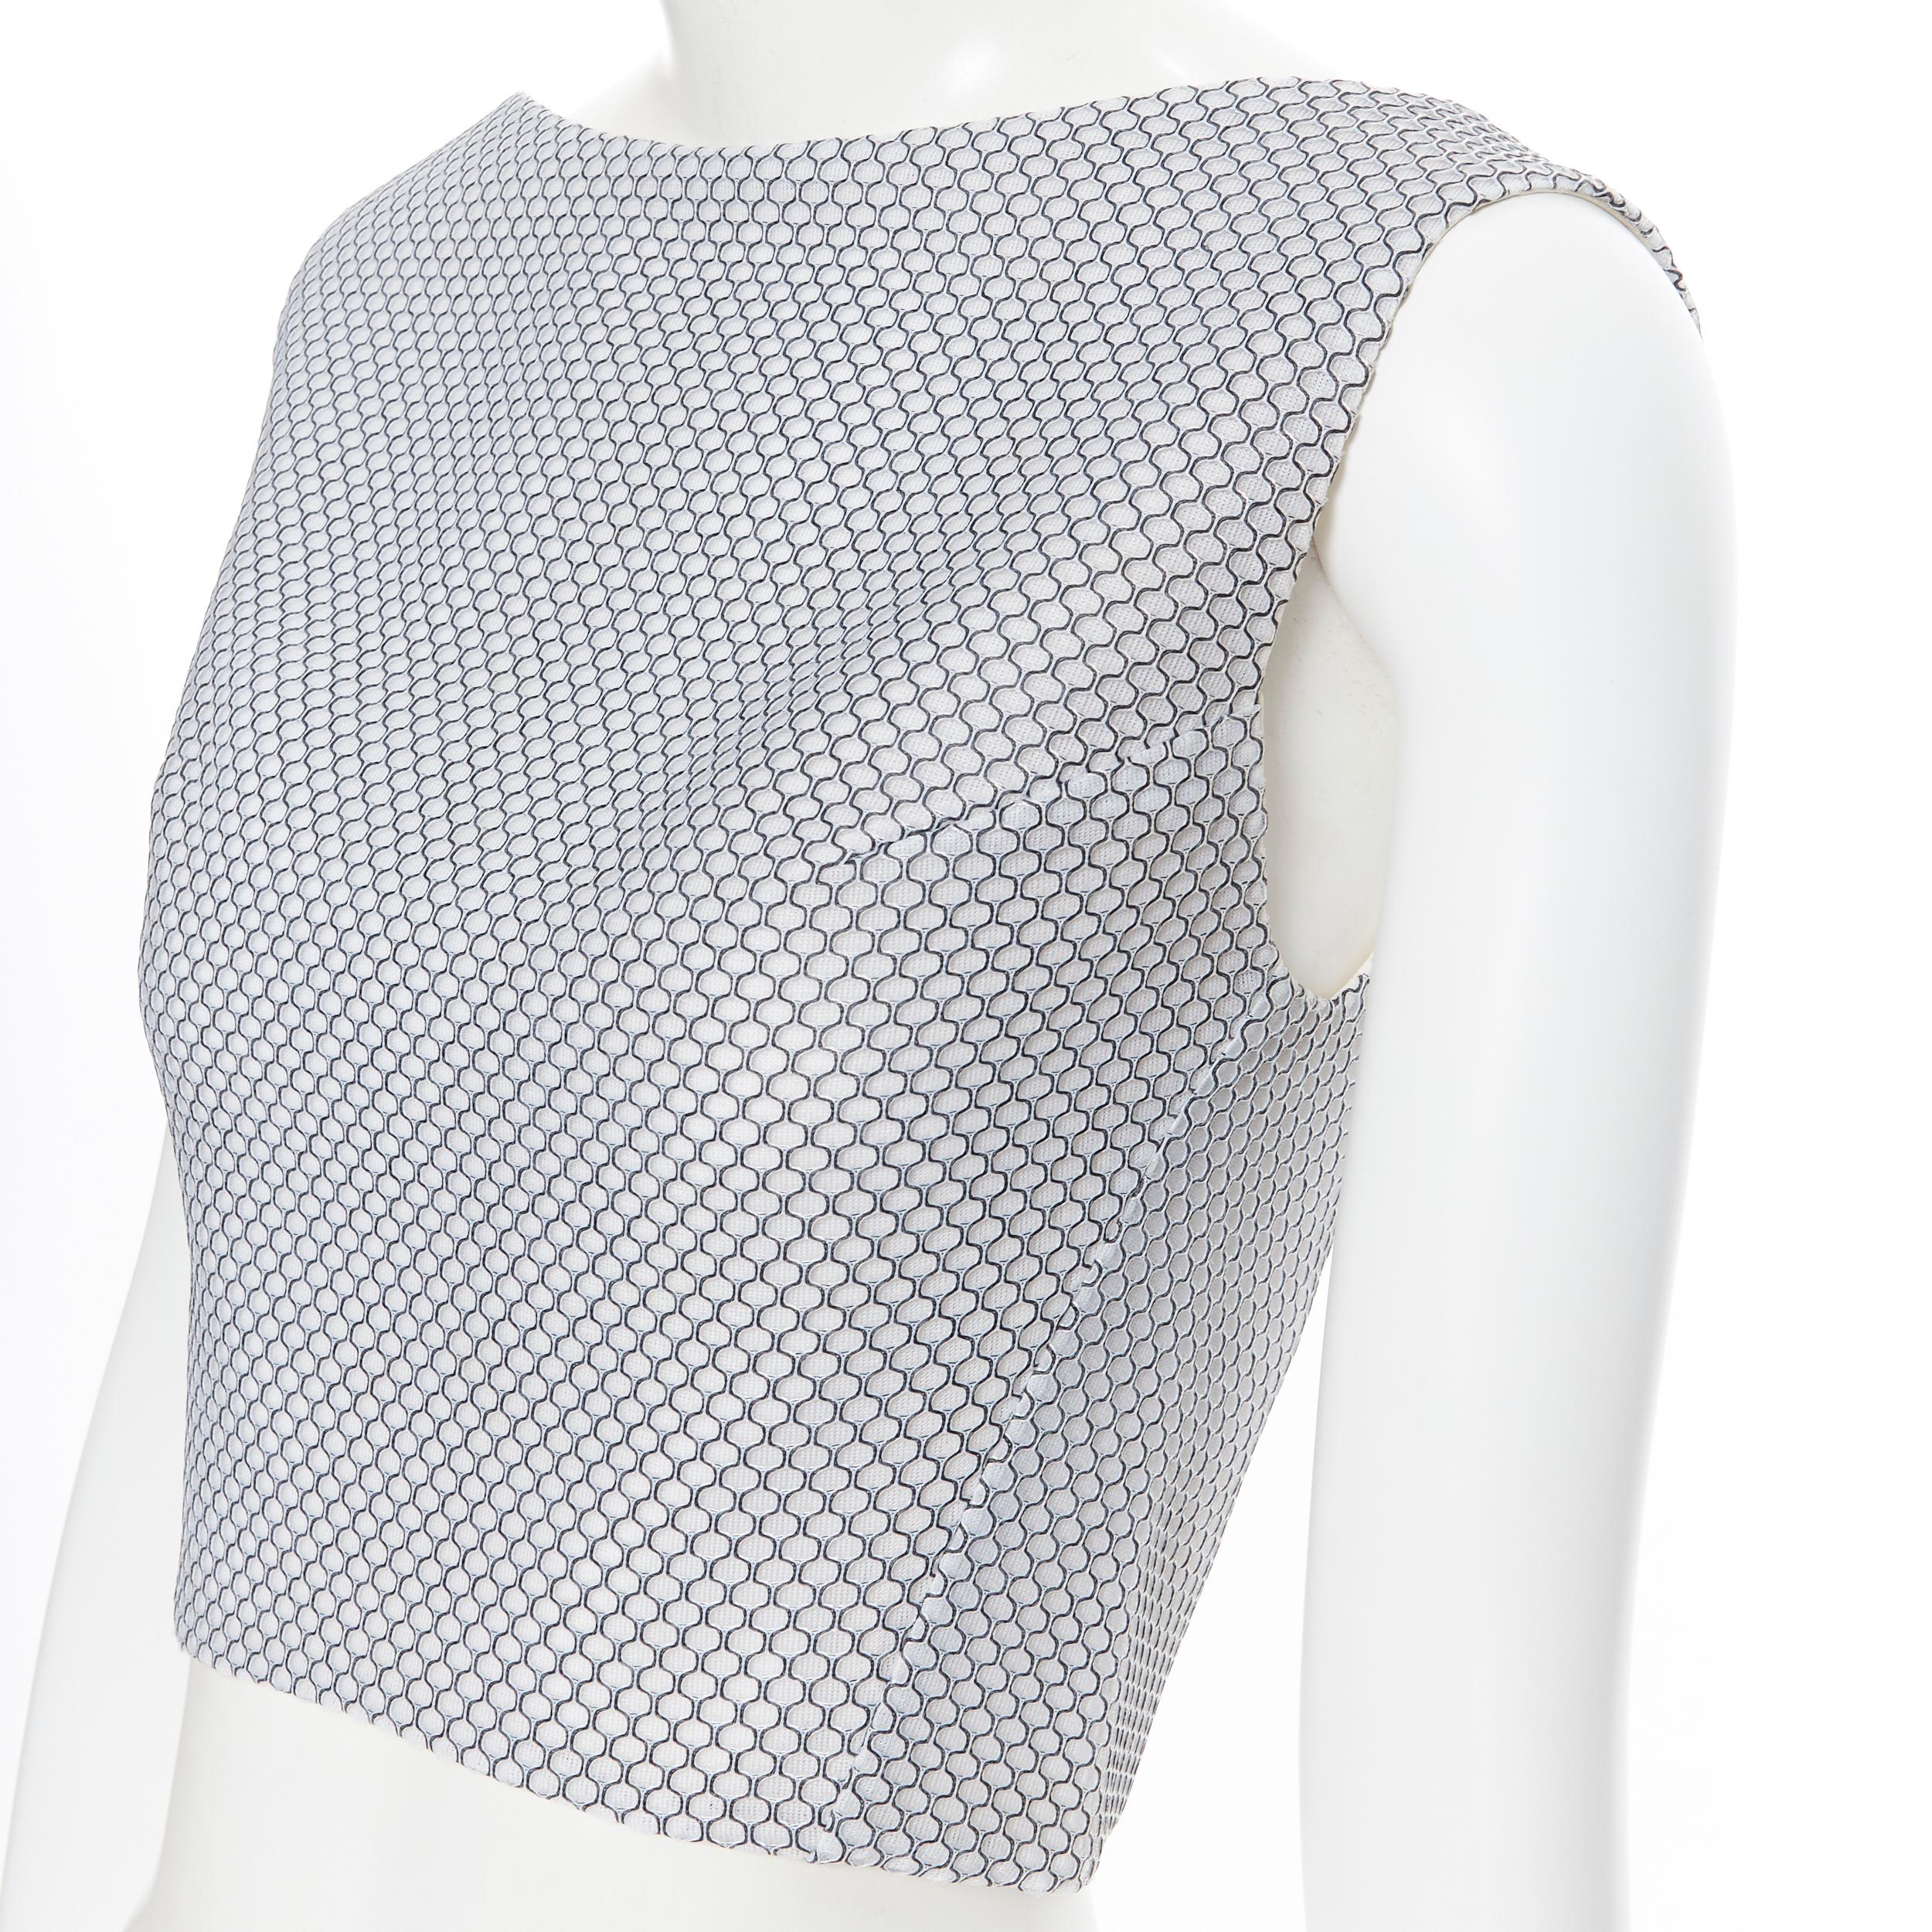 MATICEVSKI 2016 Petal Bodice honeycomb textured sleeveless crop top AU8 XS 
Reference: LNKO/A01695 
Brand: Maticevski 
Collection: 2016 
Material: Polyester 
Color: White 
Pattern: Solid 
Closure: Zip 
Extra Detail: Boat neck. Sleeveless. Cropped